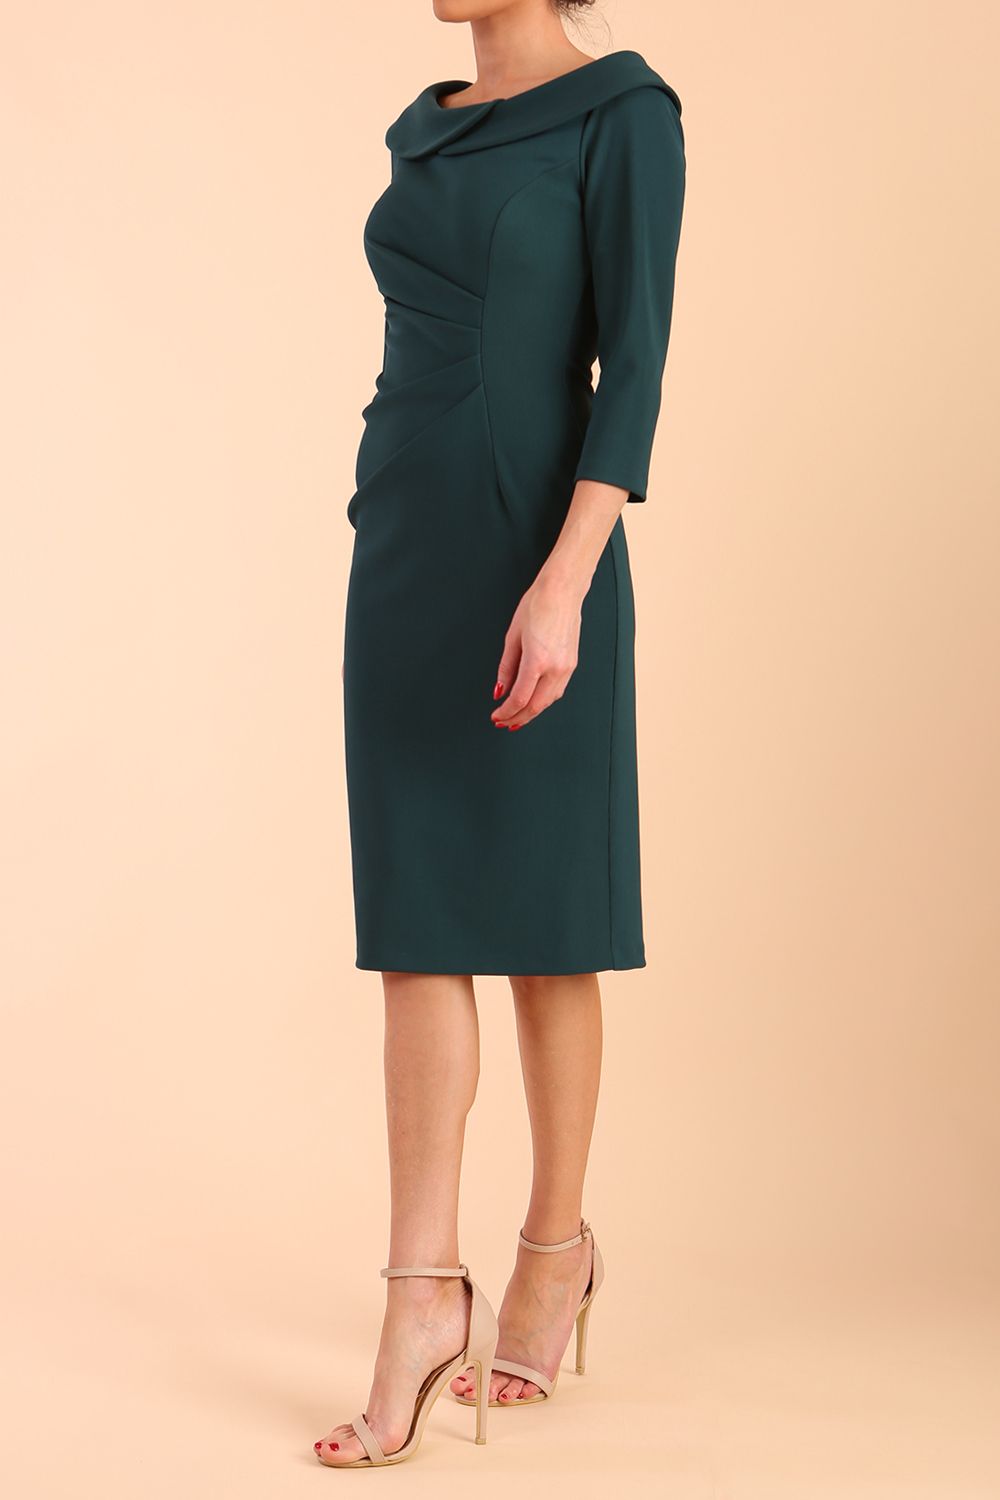 Model wearing diva catwalk Monique 3/4 Sleeve Pencil Dress in Green Gables sideModel wearing diva catwalk Monique 3/4 Sleeve Pencil Dress with Overlapping Folded  Round Neckline and 3/4 sleeves and knee length in Green Gables side